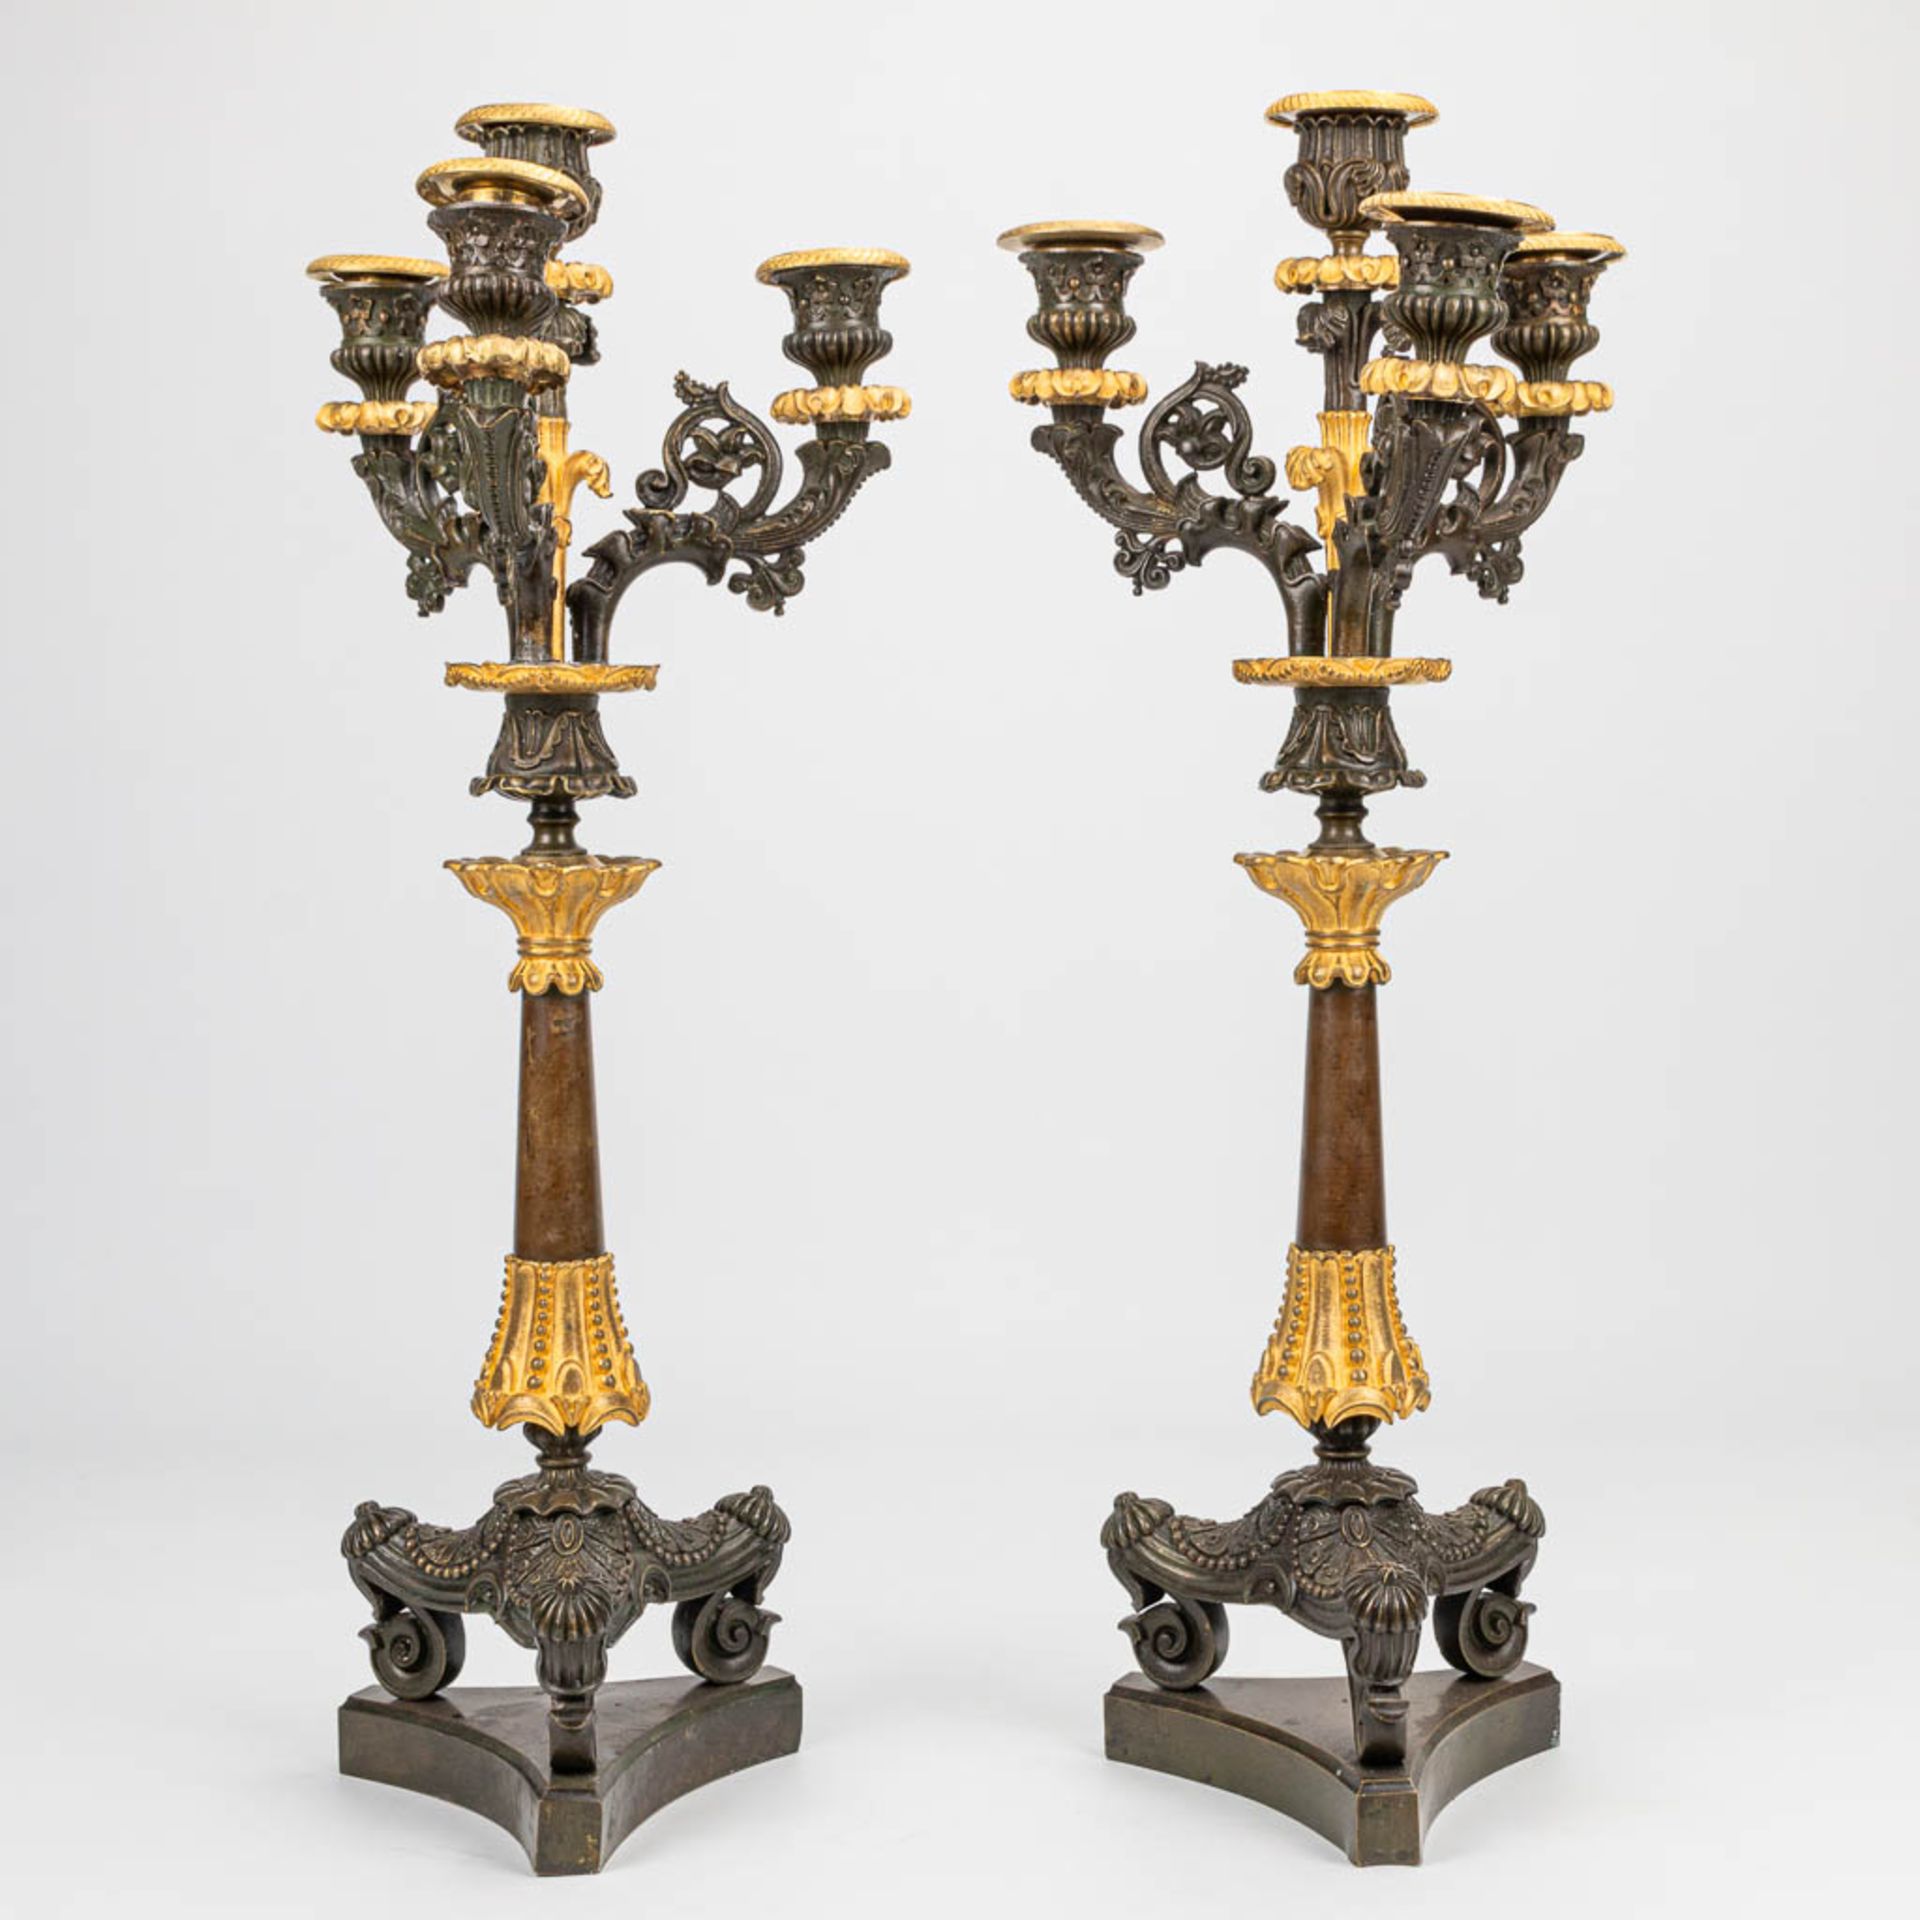 A pair of candelabra with gilt and patinated bronze in empire style, of the period. (16 x 20 x 51 cm - Image 3 of 6